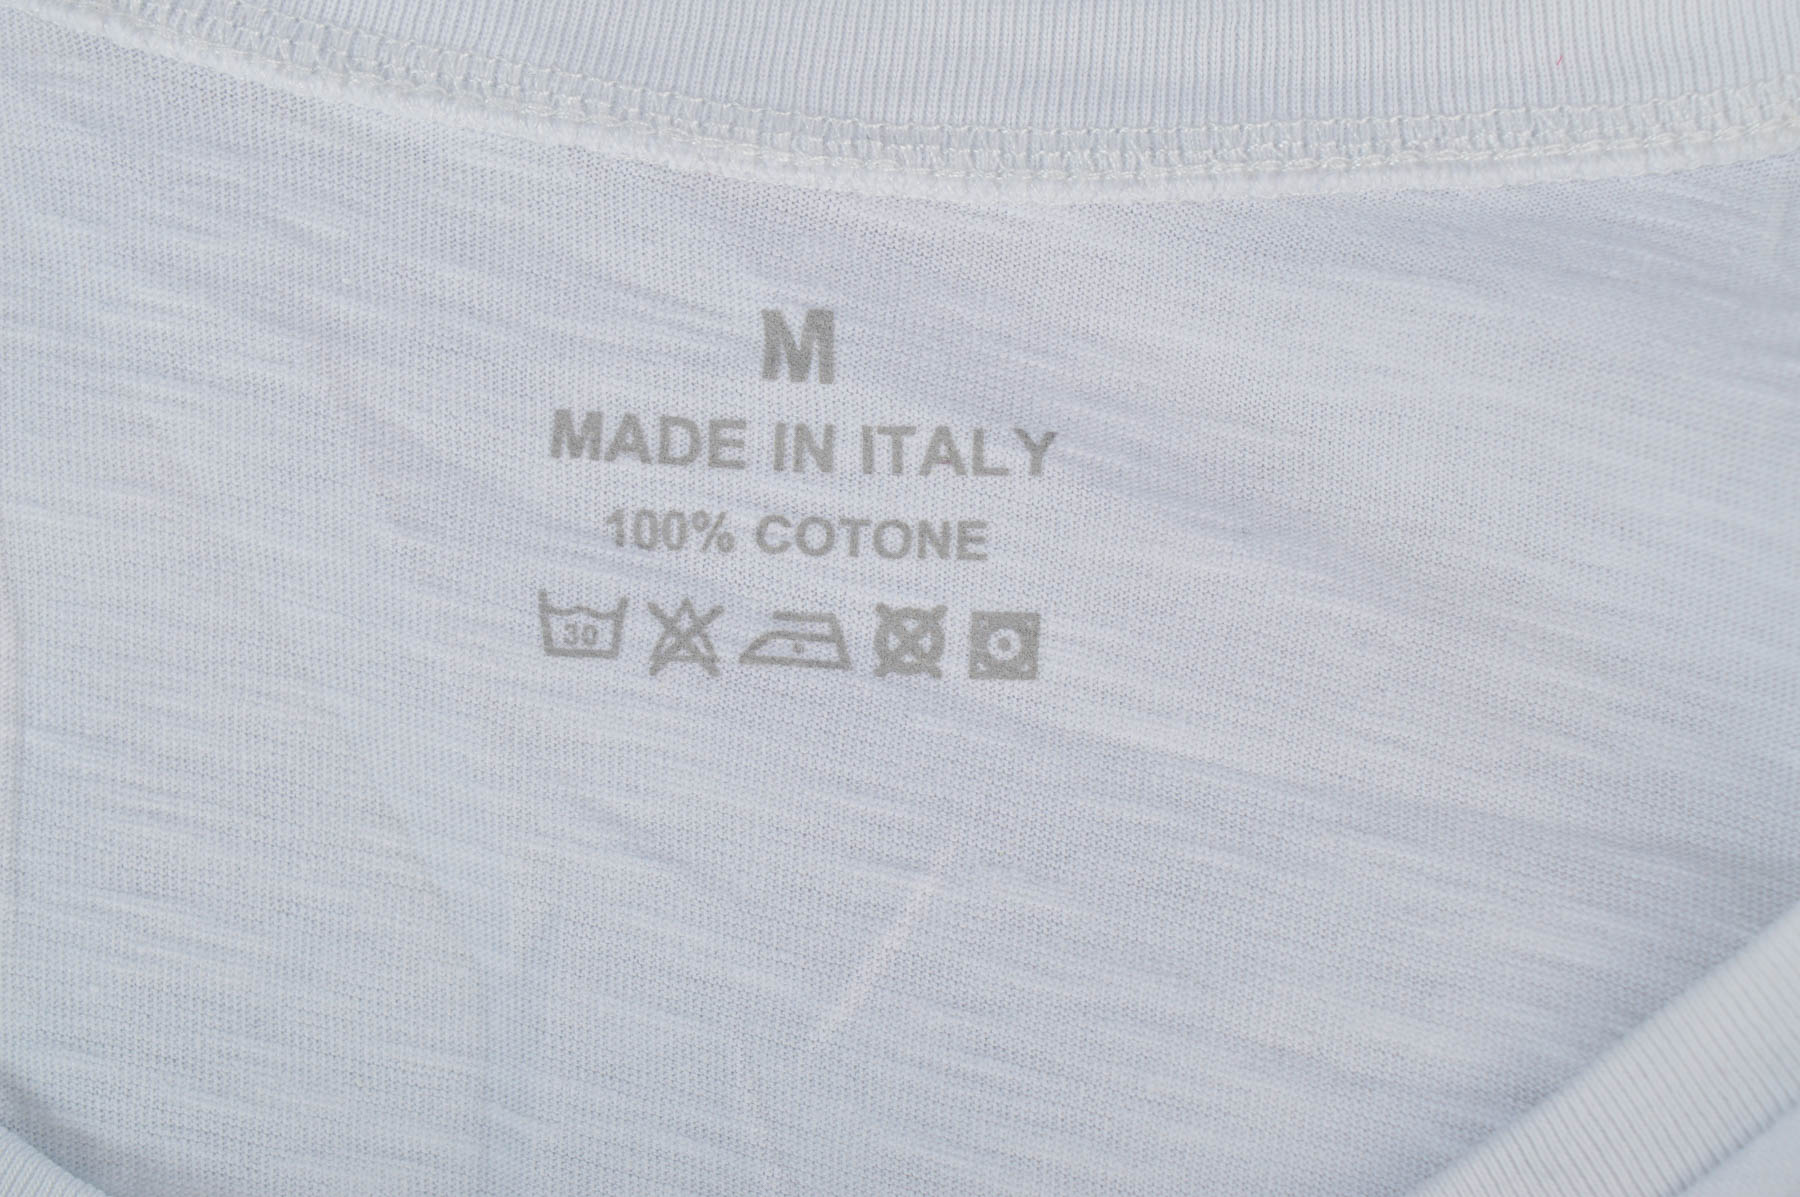 Women's t-shirt - Made in Italy - 2